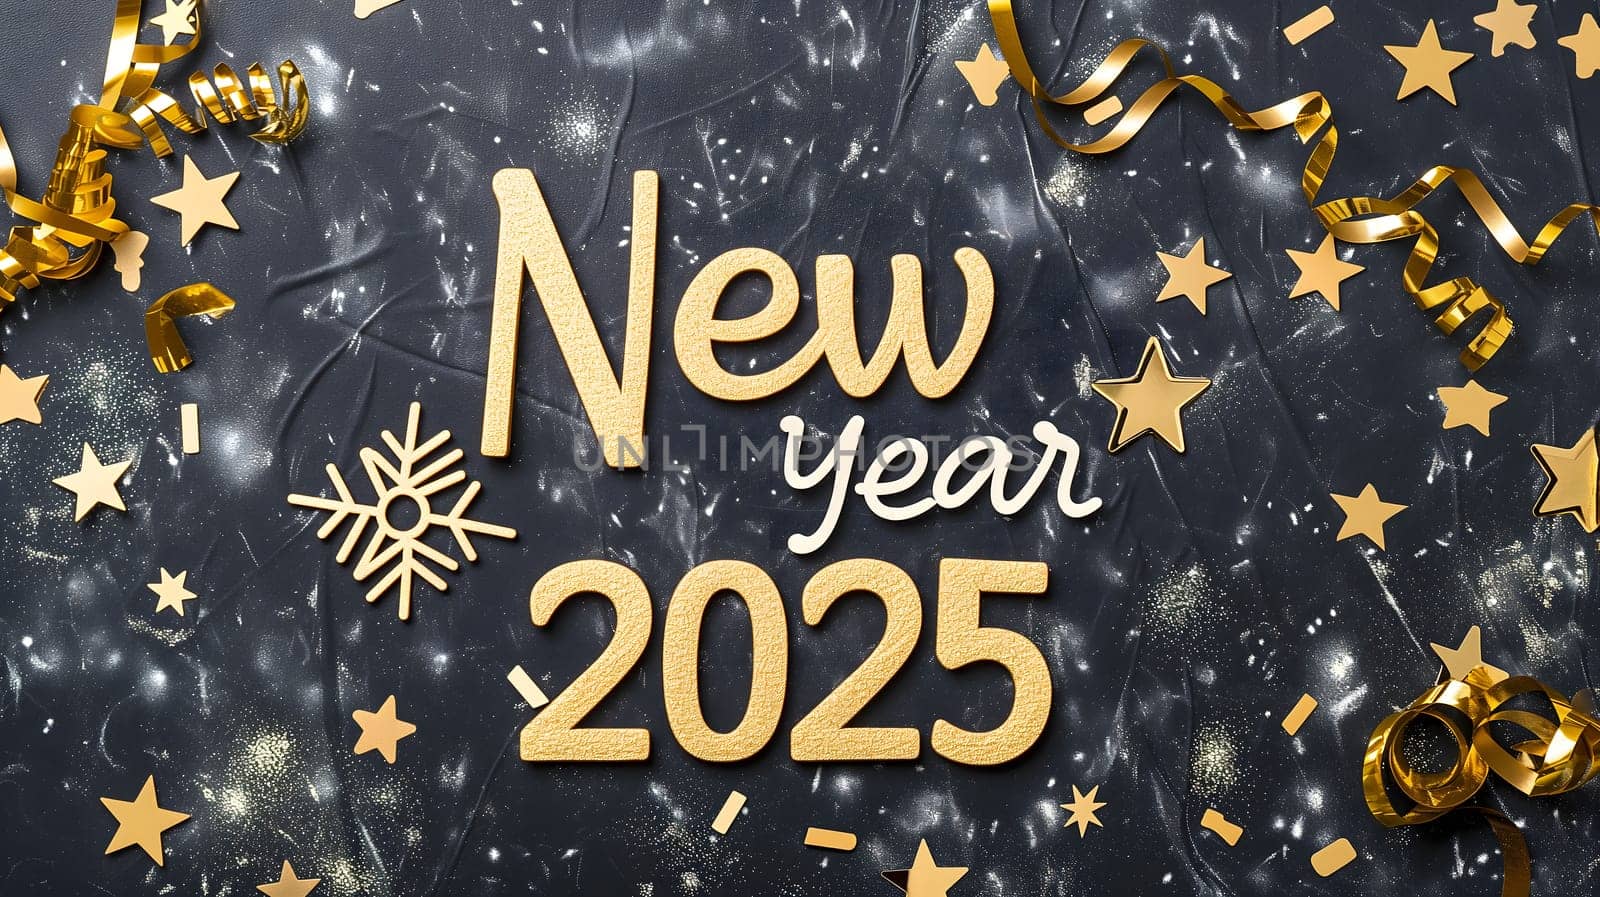 letters New year 2025 laid on flat background with high angle view, celebration concept. Neural network generated image. Not based on any actual scene or pattern.